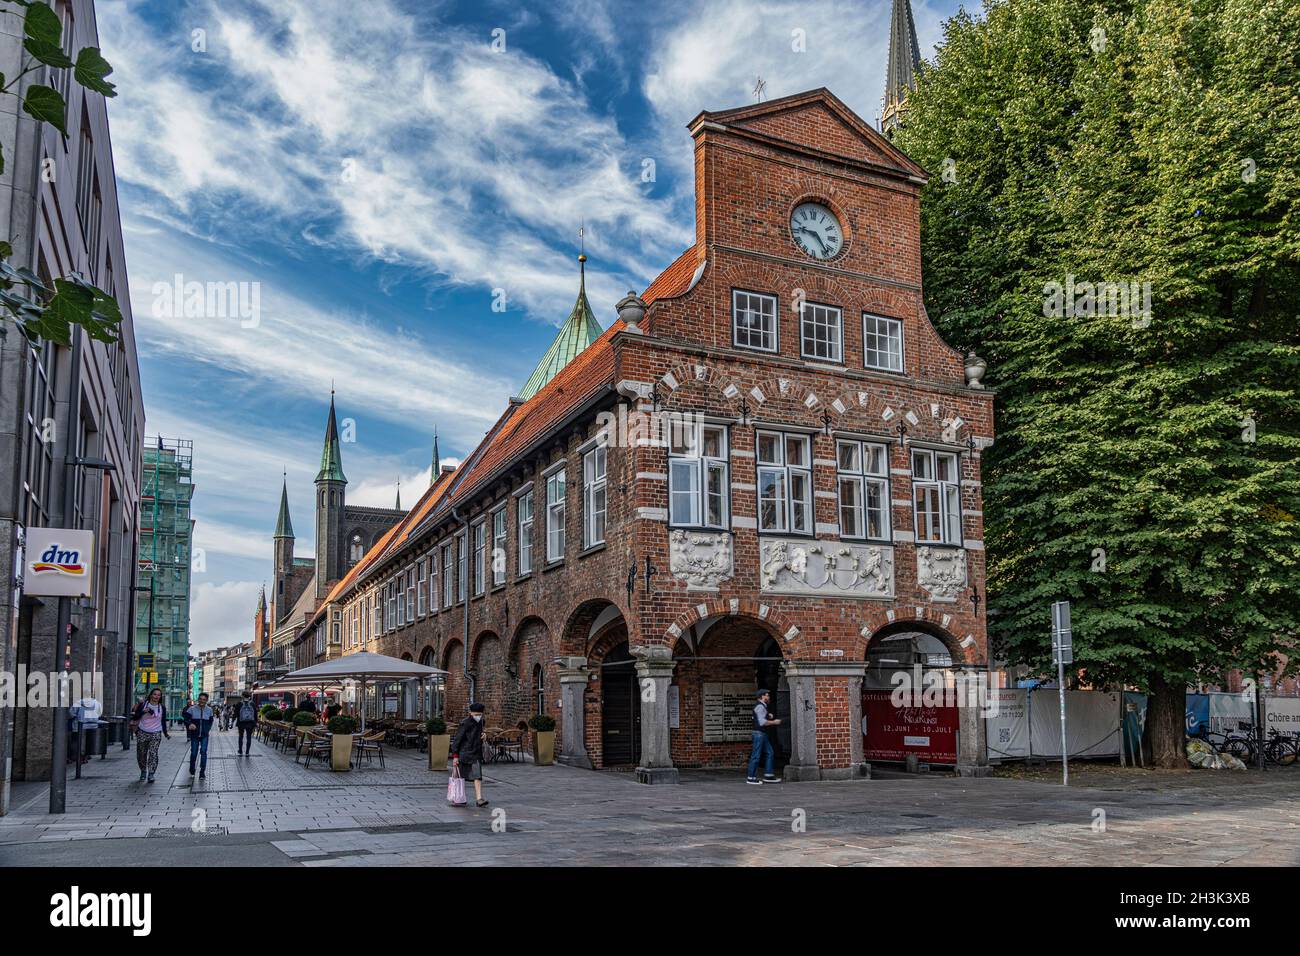 Facade of a medieval building in the historic center of Lübeck. Luebeck, Germany, Europe Stock Photo